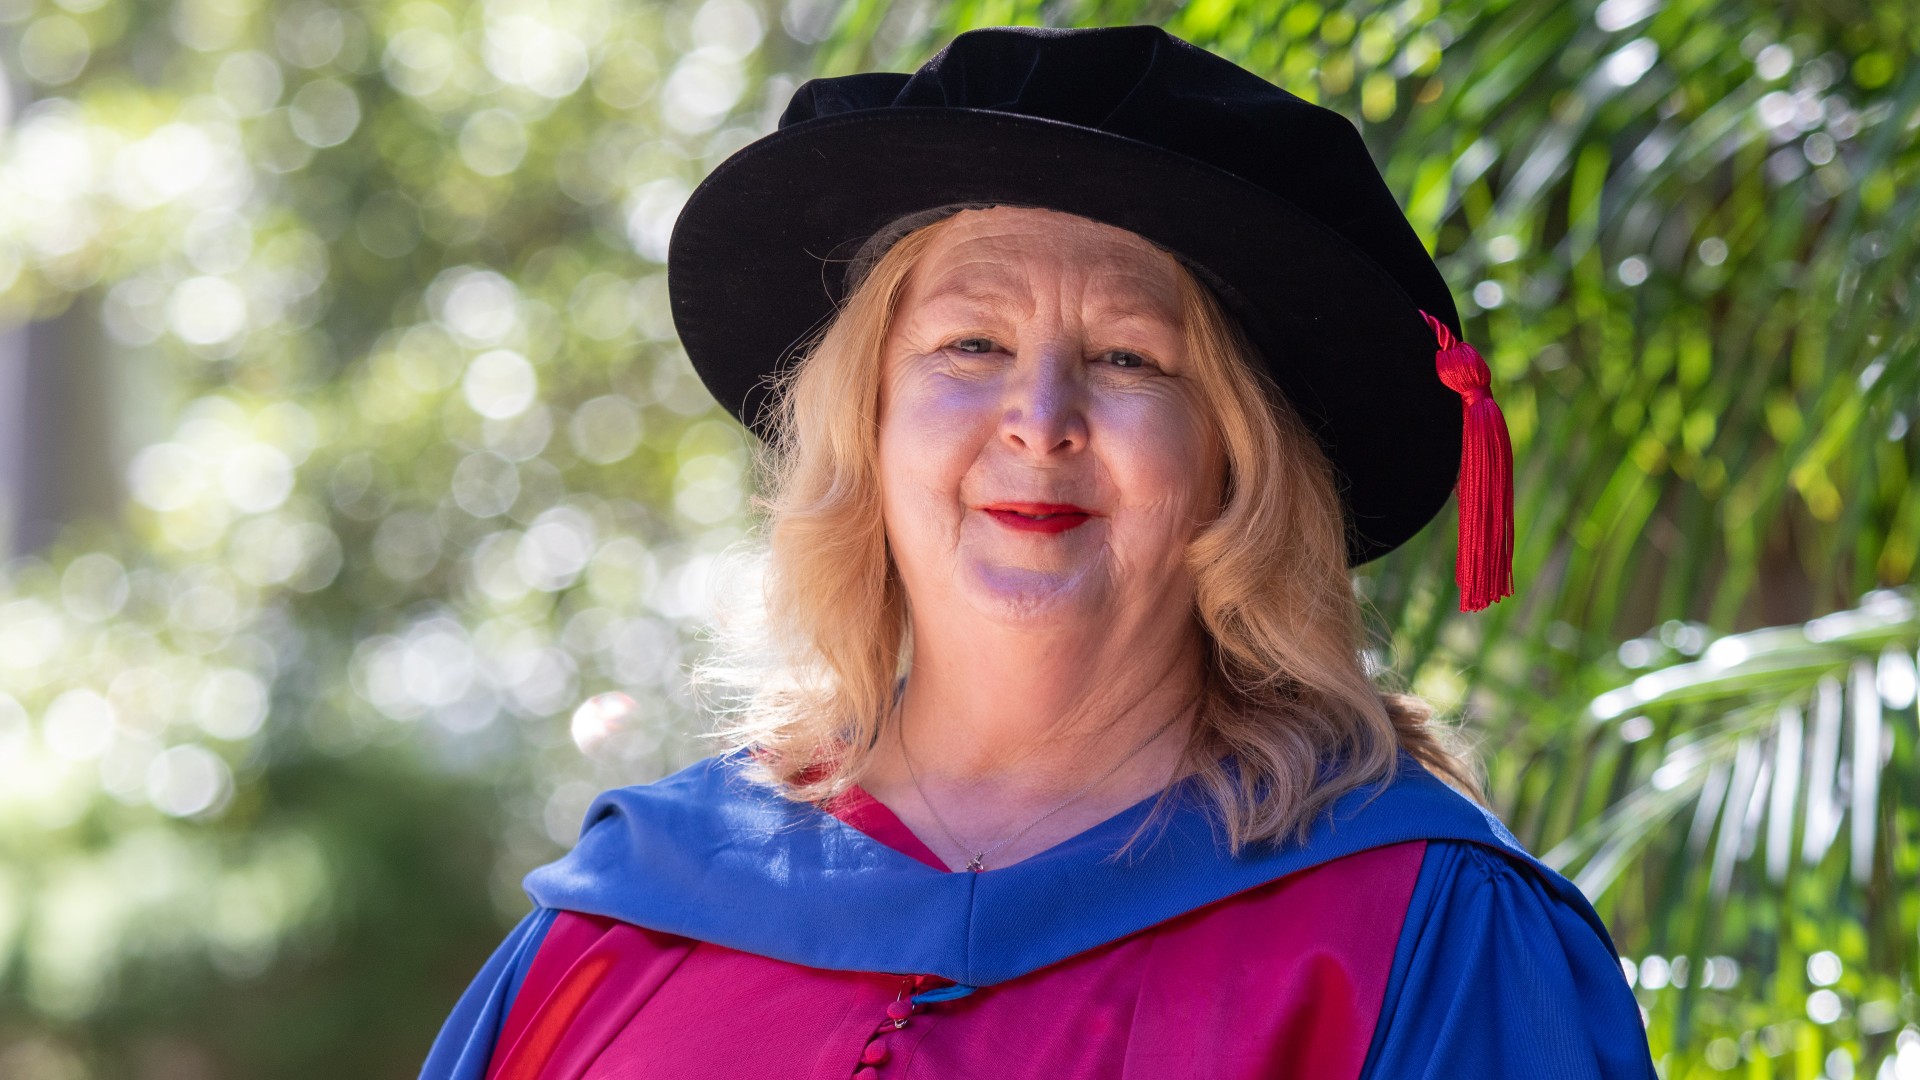 Dr Geraldine Hardie, wearing a blue graduation gown and a black hat, stands in front of a greenery background on graduation day. Photo: Andy Zakeli